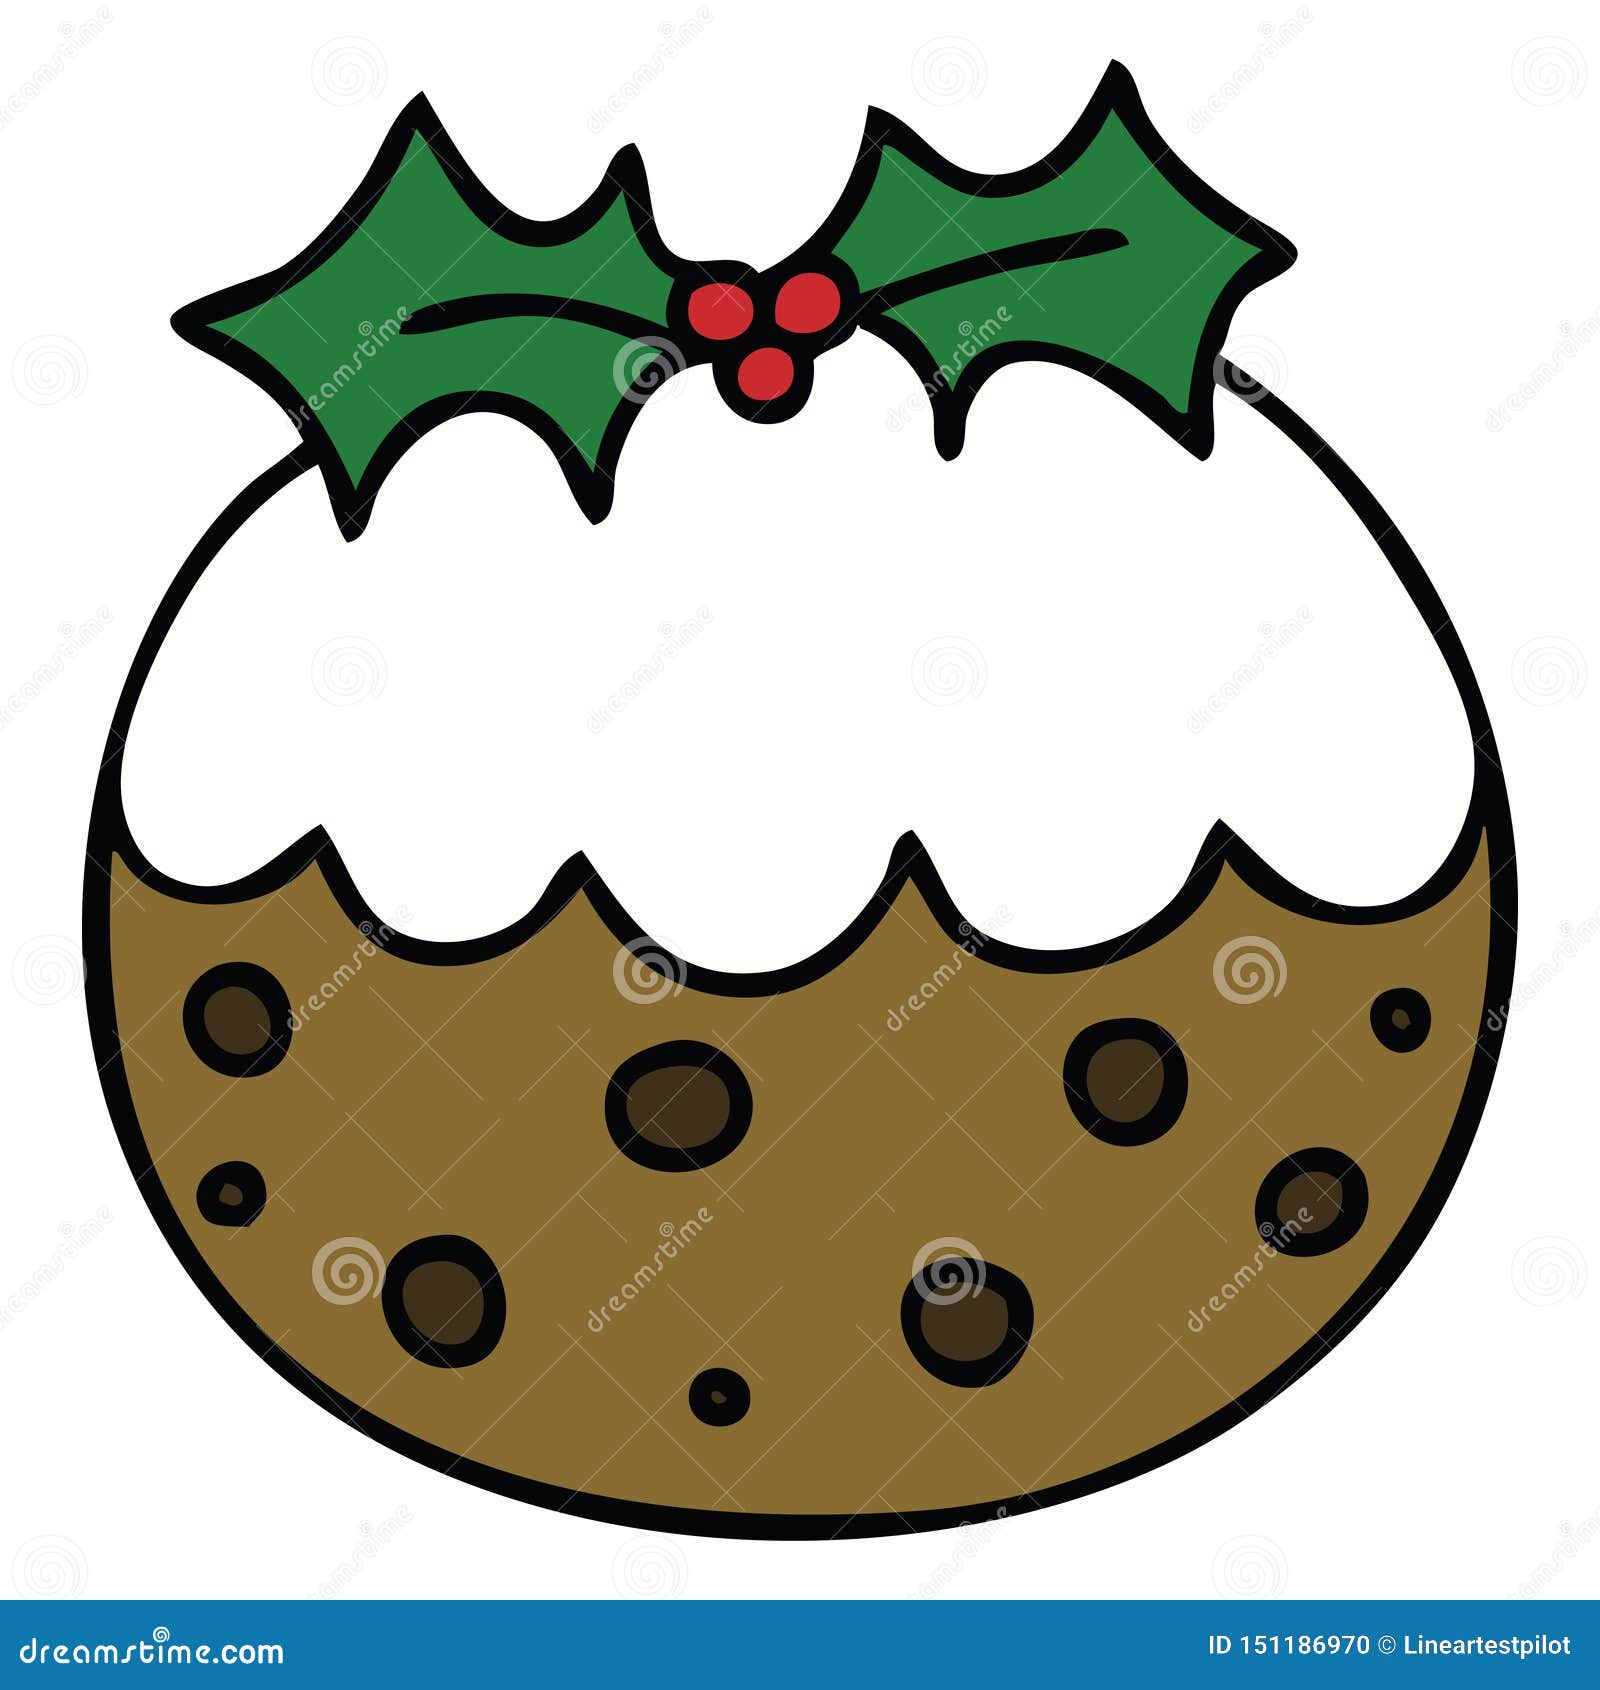 A Creative Quirky Hand Drawn Cartoon Christmas Pudding Stock Vector -  Illustration of food, character: 151186970